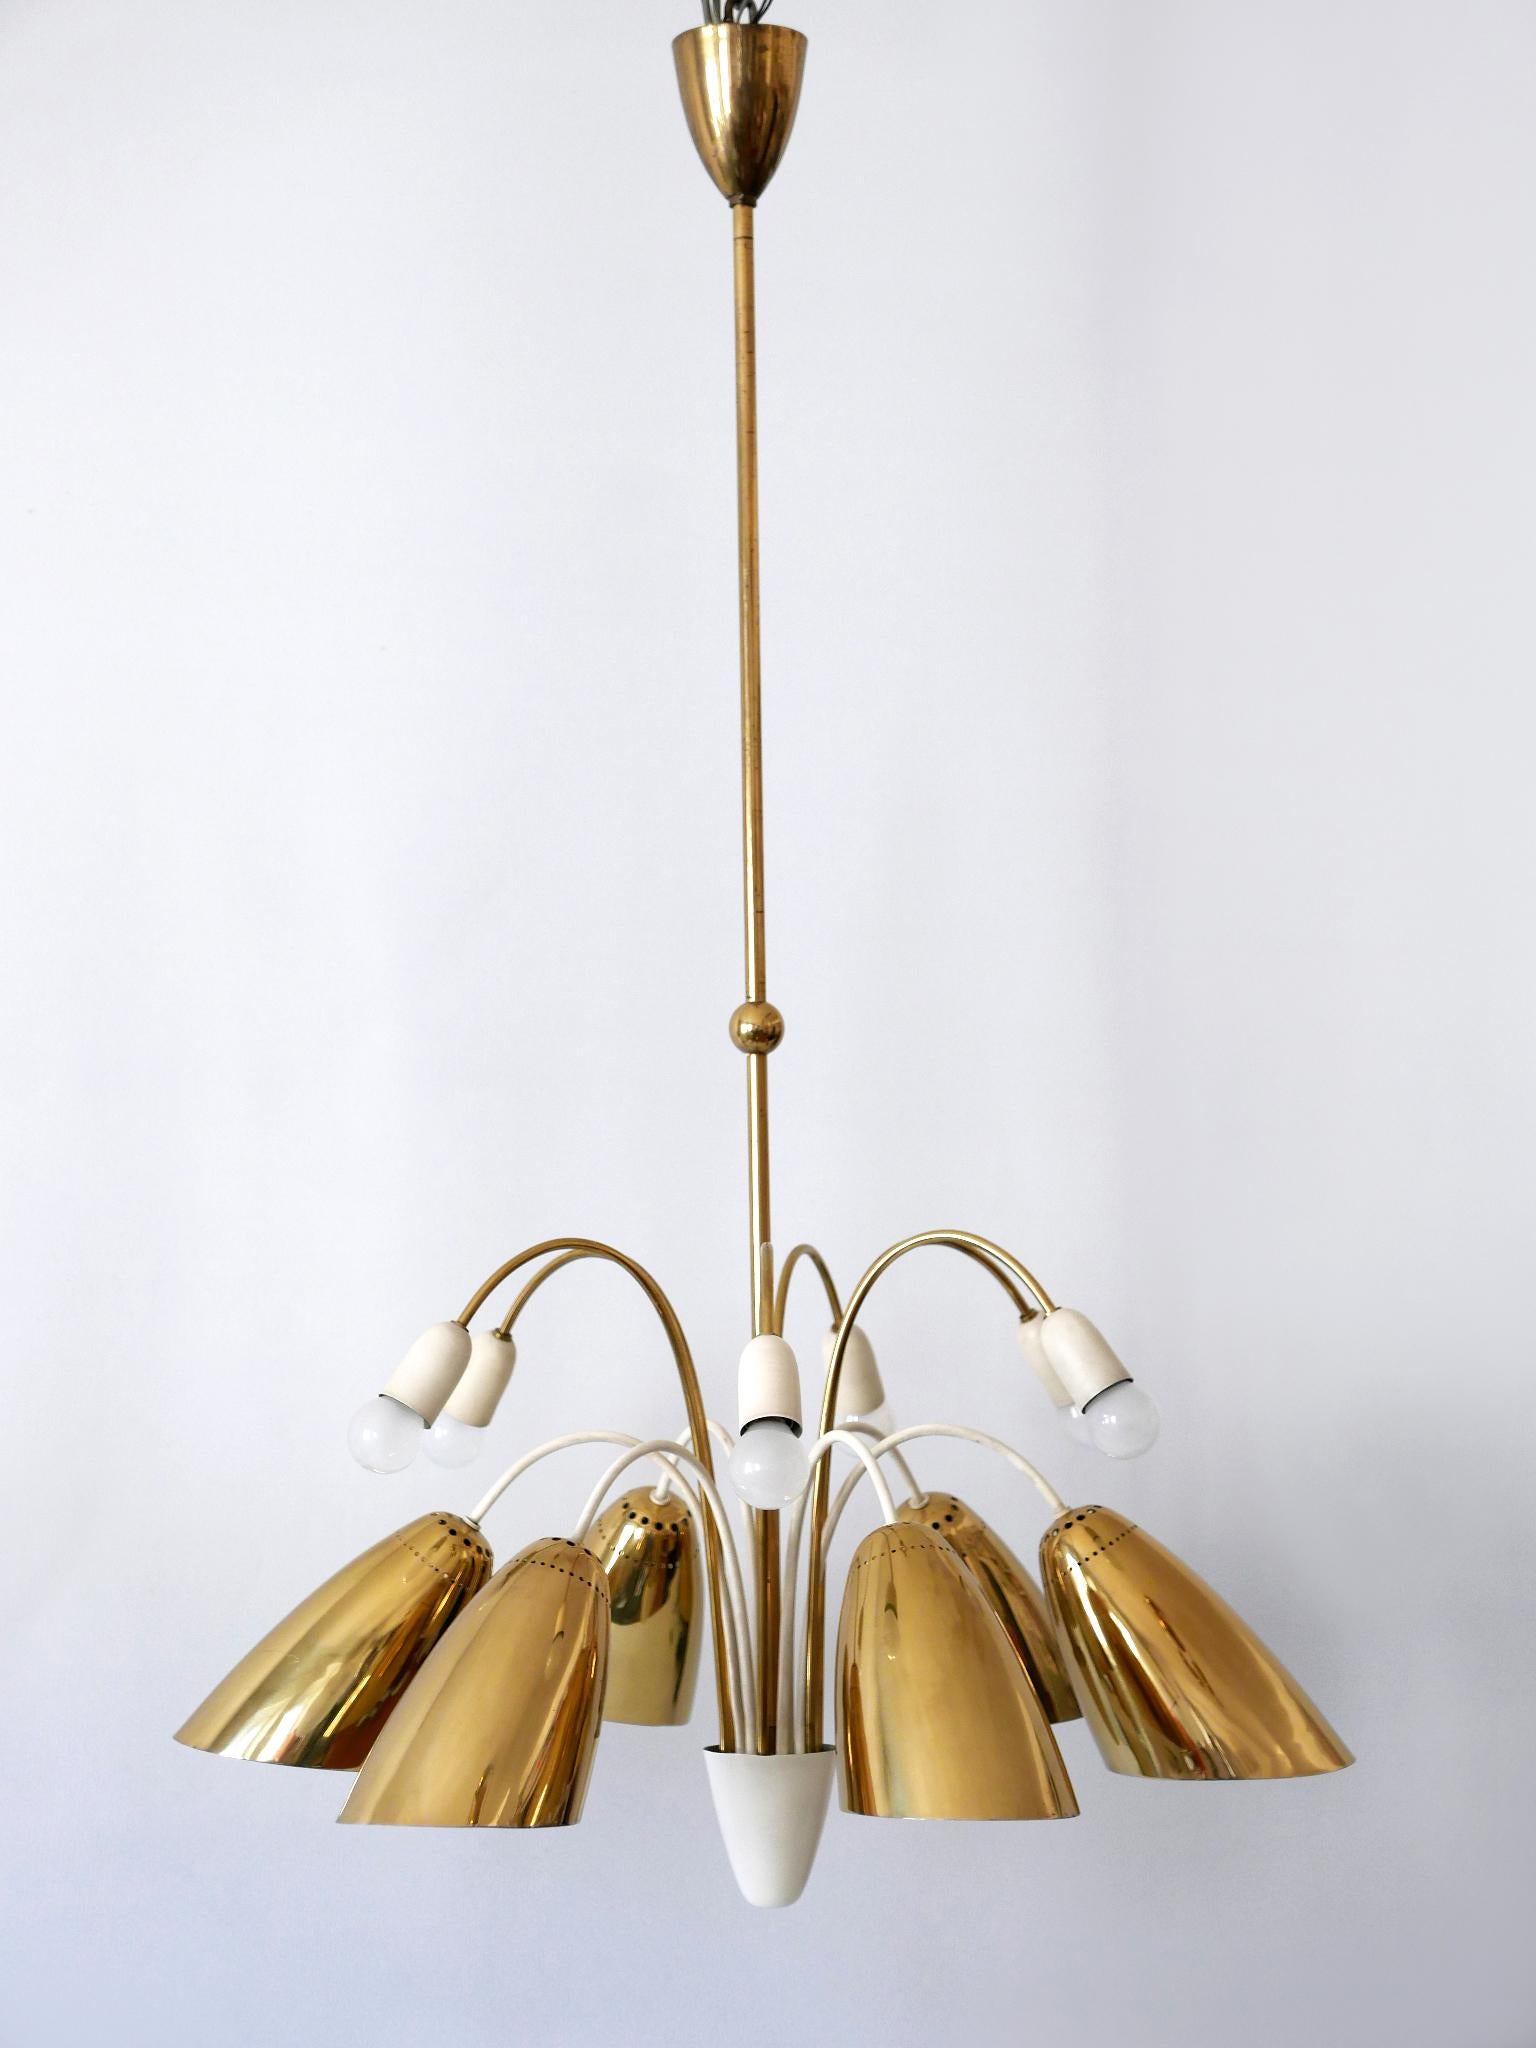 Extremely rare, large & highly decorative Mid-Century Modern 12-armed sputnik chandelier or pendant lamp. Designed and manufactured by Vereinigte Werkstätten, Germany, 1950s.

Executed in brass and metal, the chandelier needs 6 x E27 / E26 and 6 x